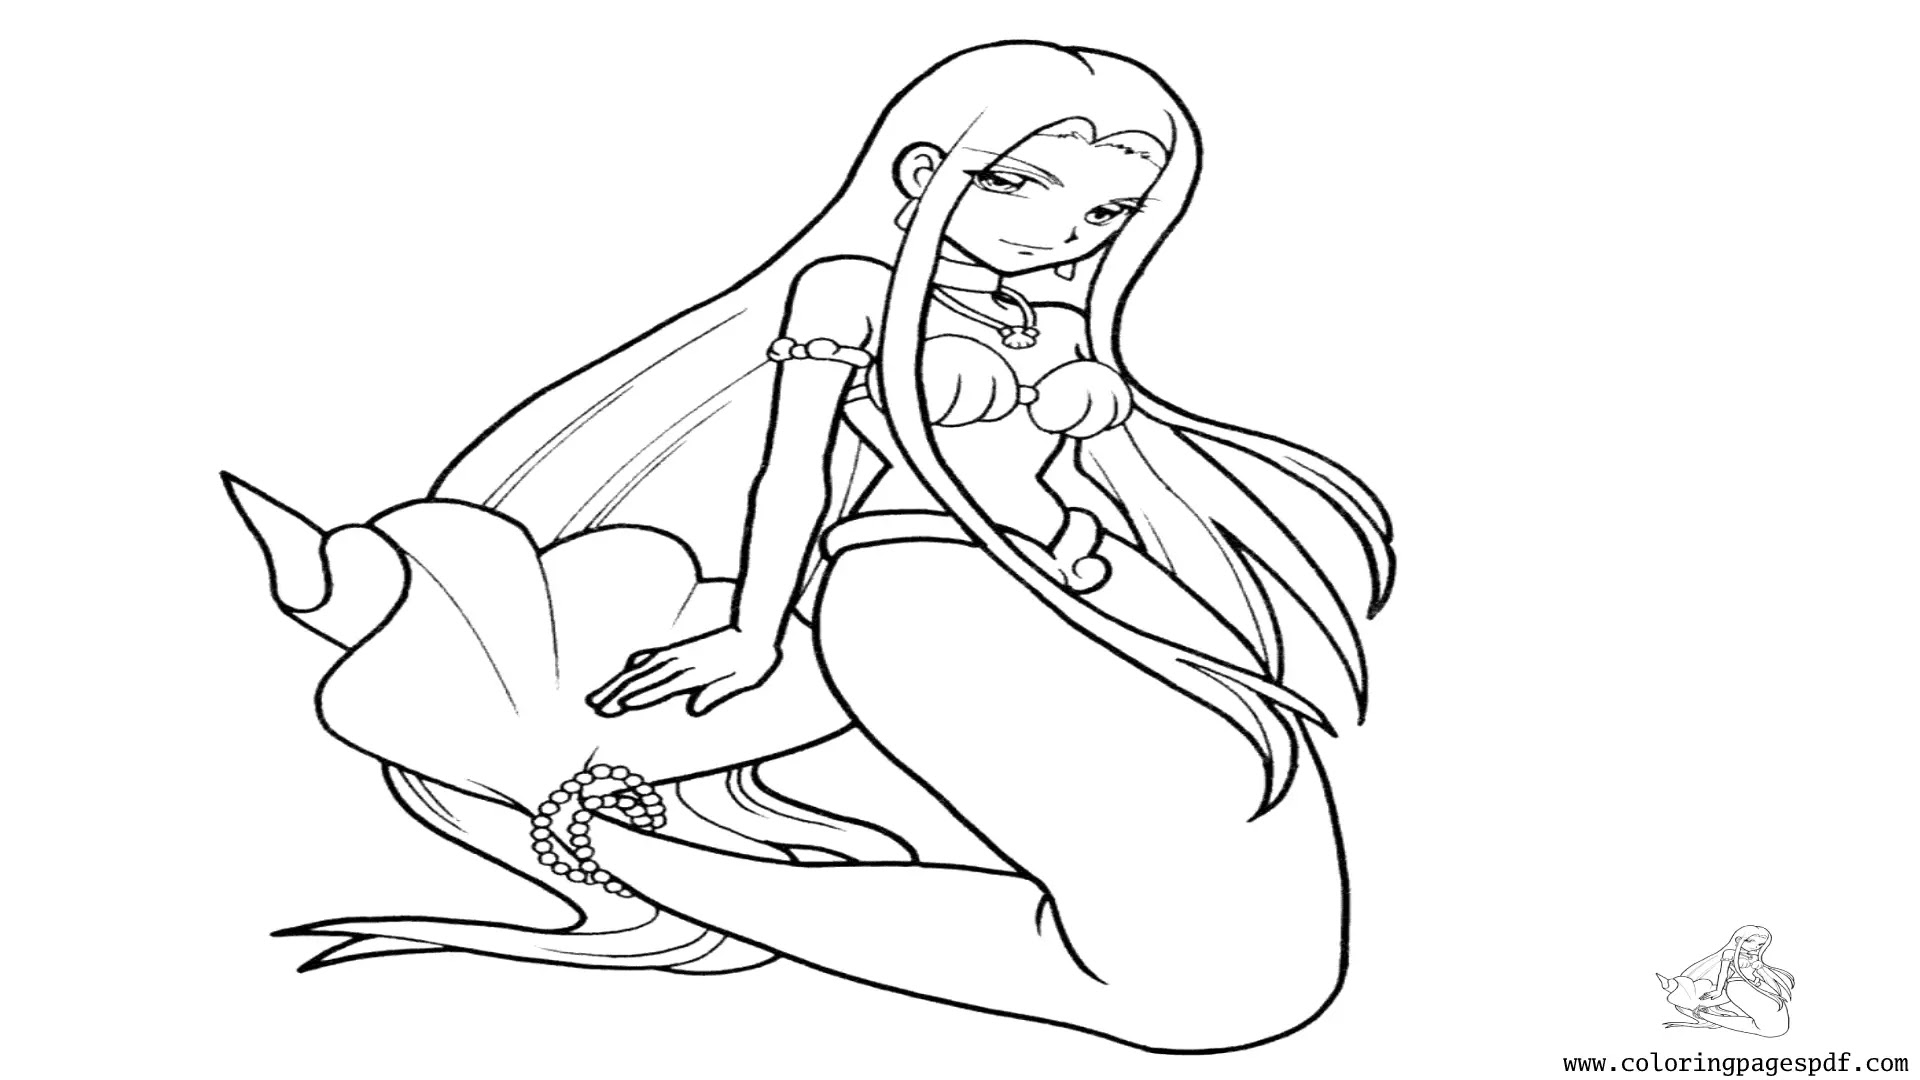 Coloring Page Of An Anime Mermaid